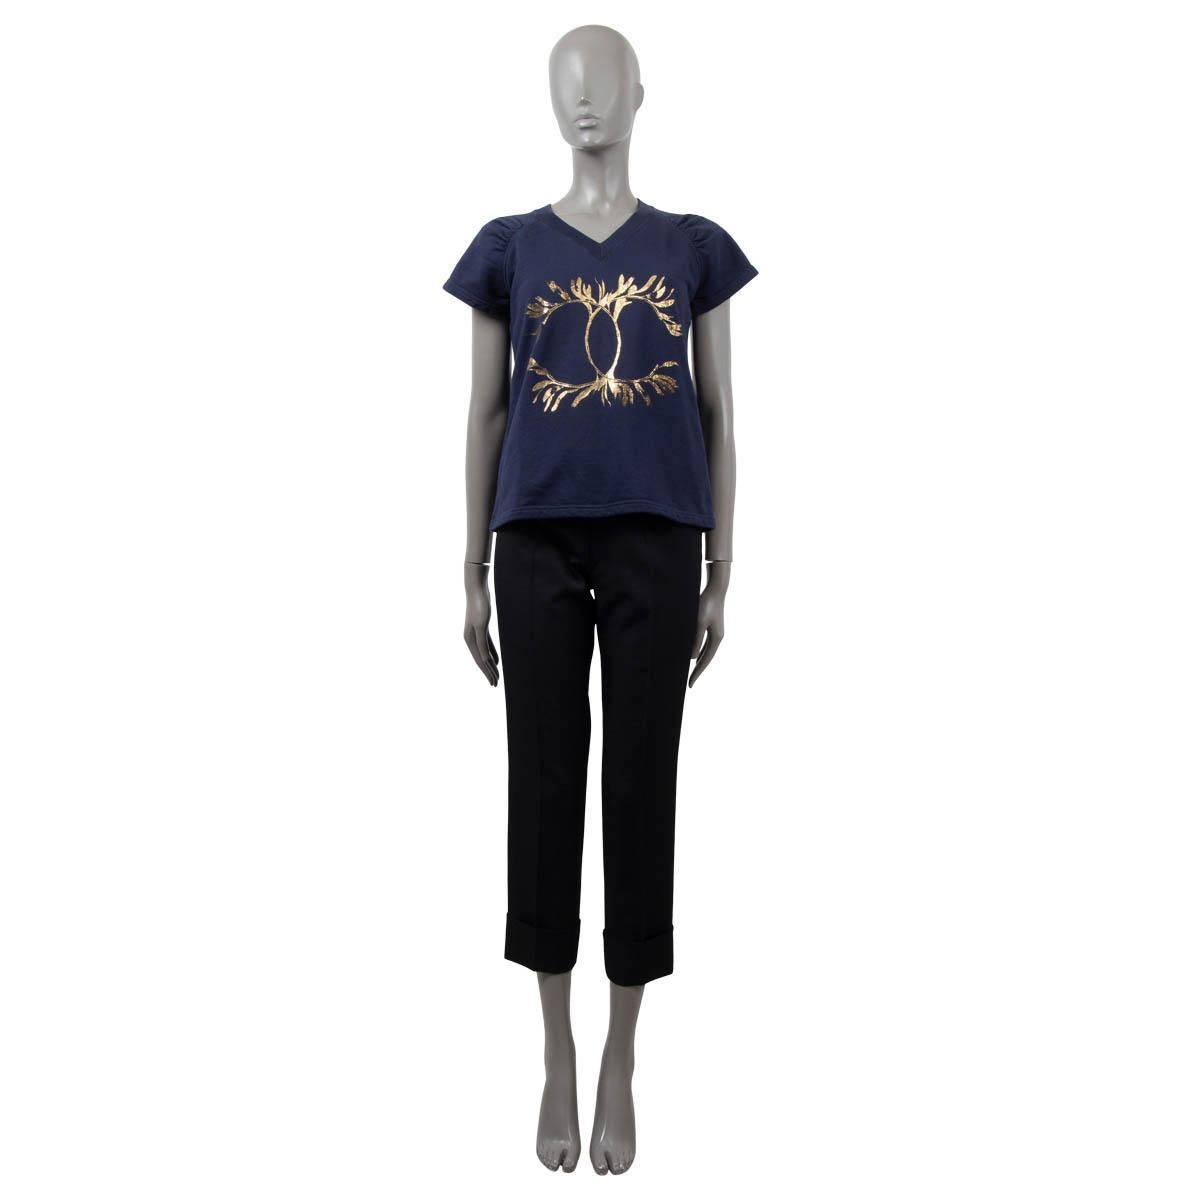 100% authentic Chanel v-neck T-shirt in navy blue cotton (100% - please note the content tag is missing) with gold-leaf grecian CC print. Features raglan sleeves with slight ruching. Has been worn and is in excellent condition.

2018 Paris-Greece